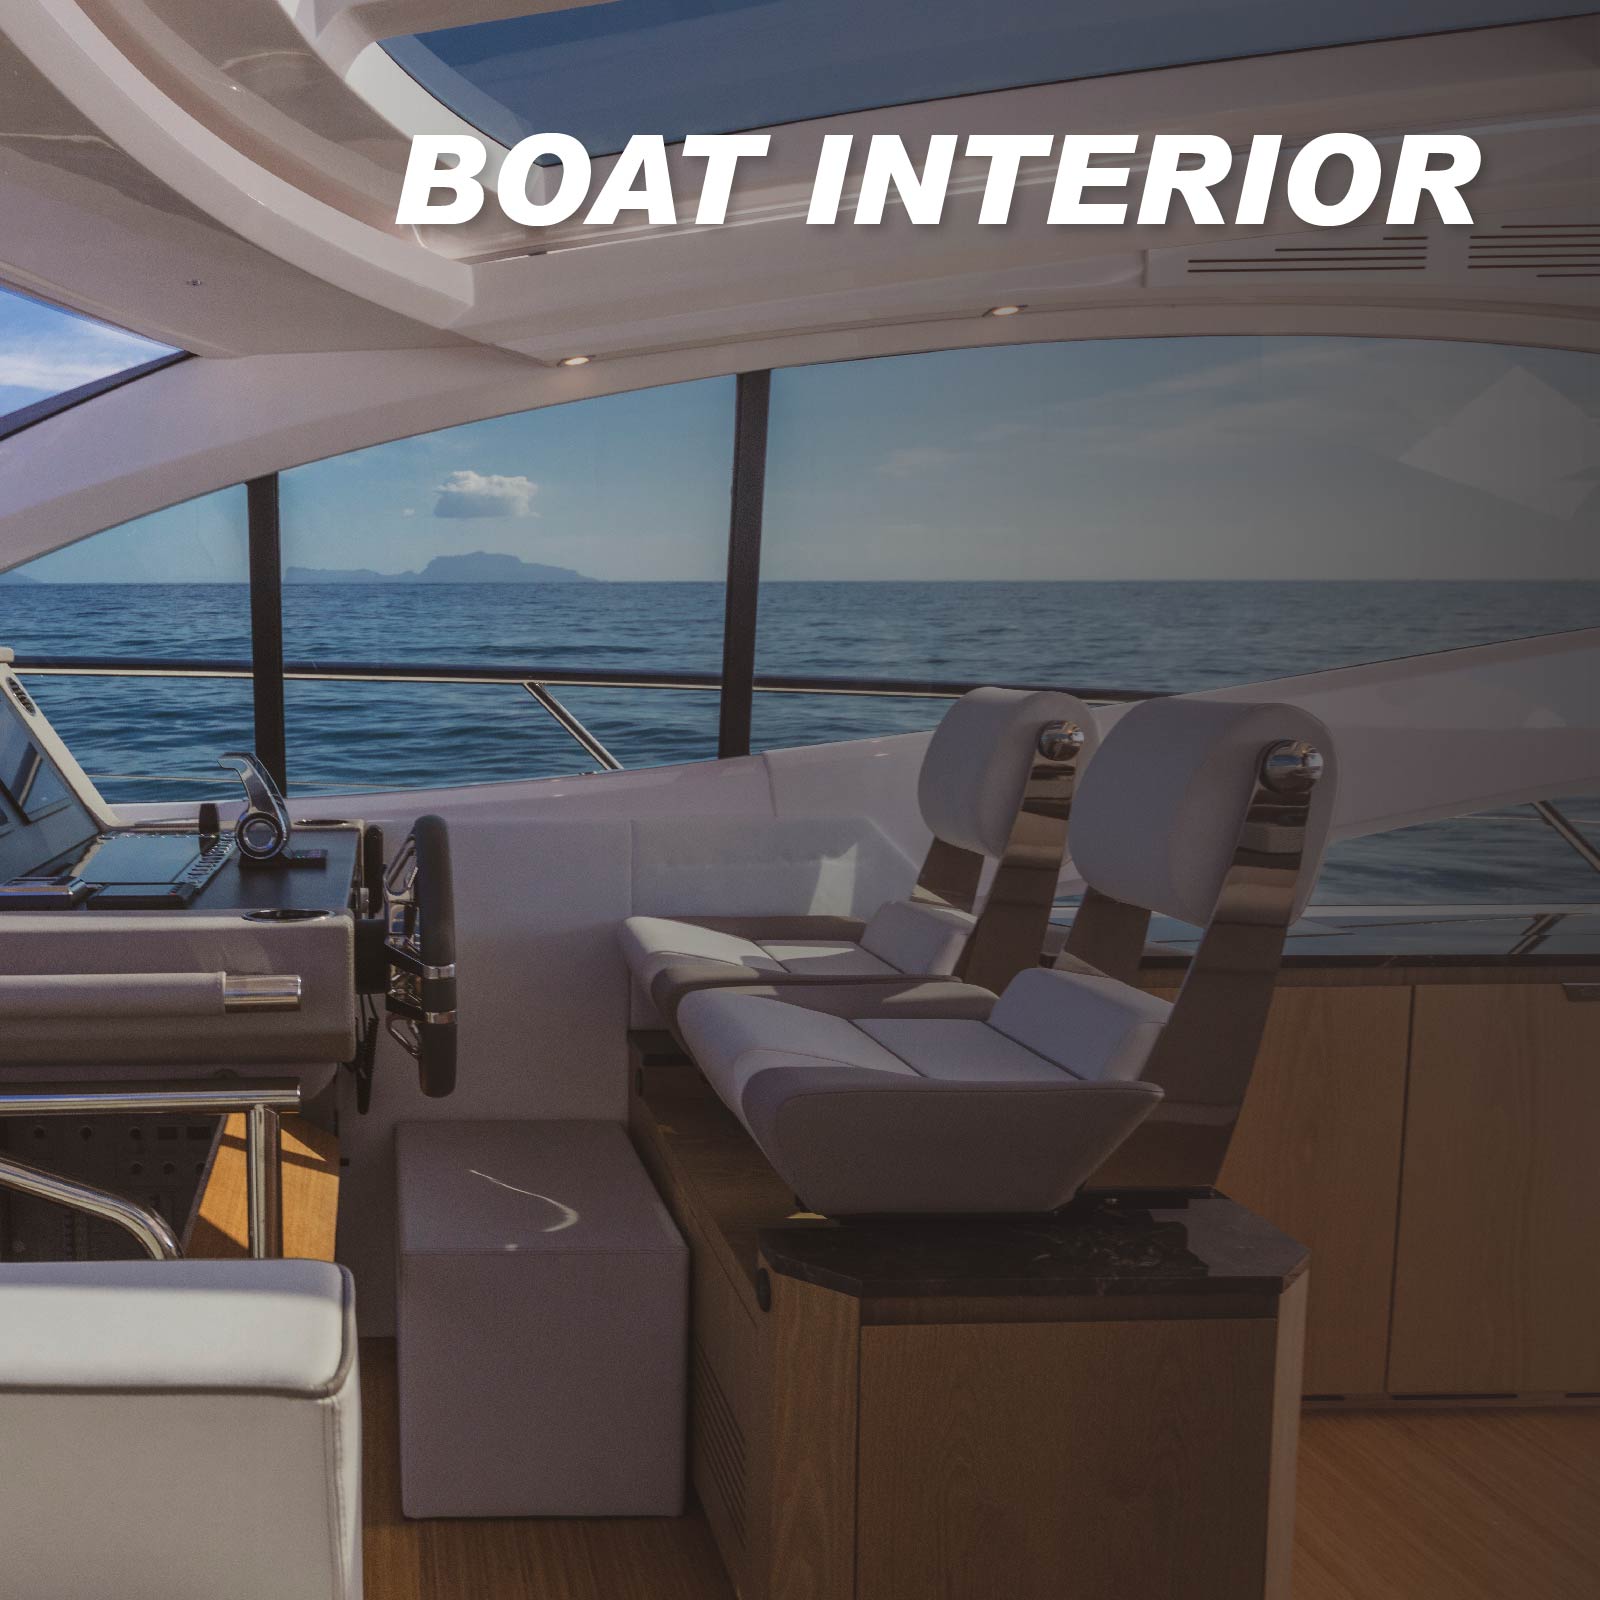 Interior Boat Cleaners